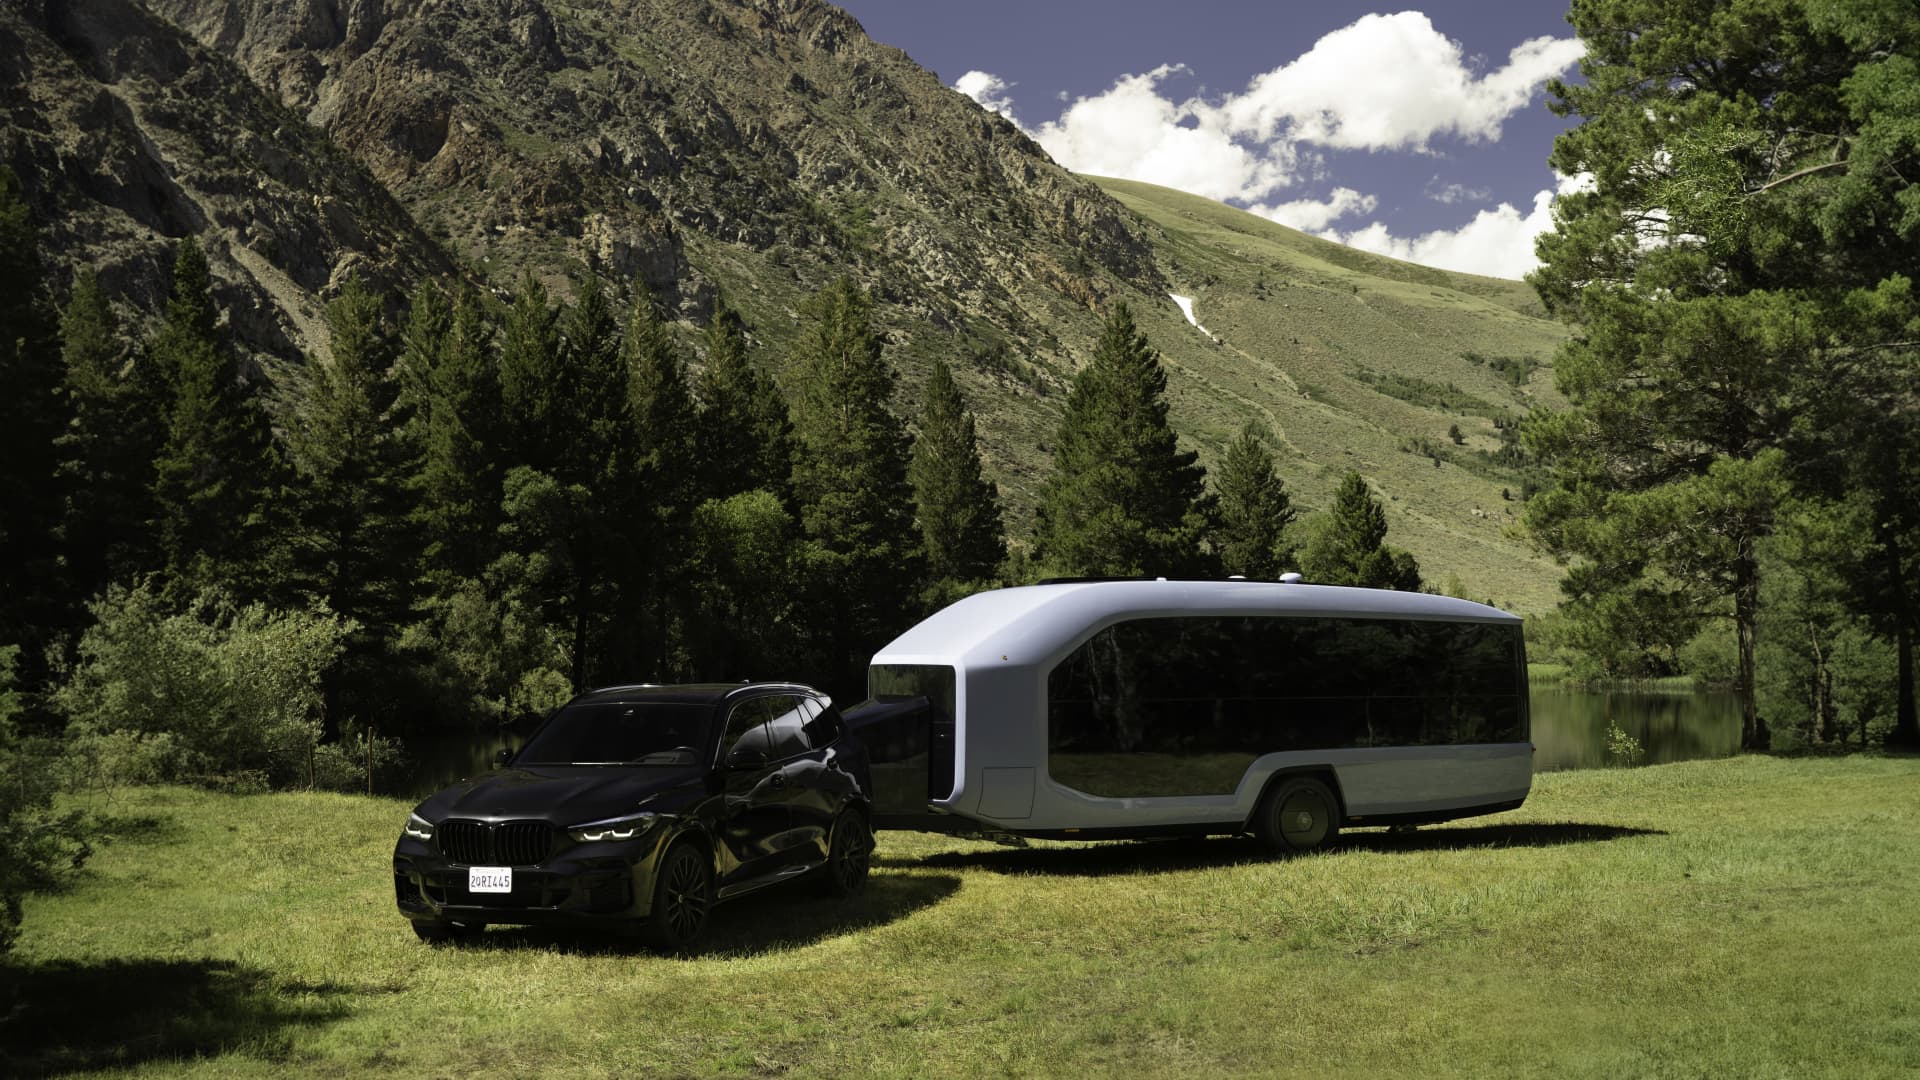 Look inside this startup’s self-propelled RV as camping goes electric